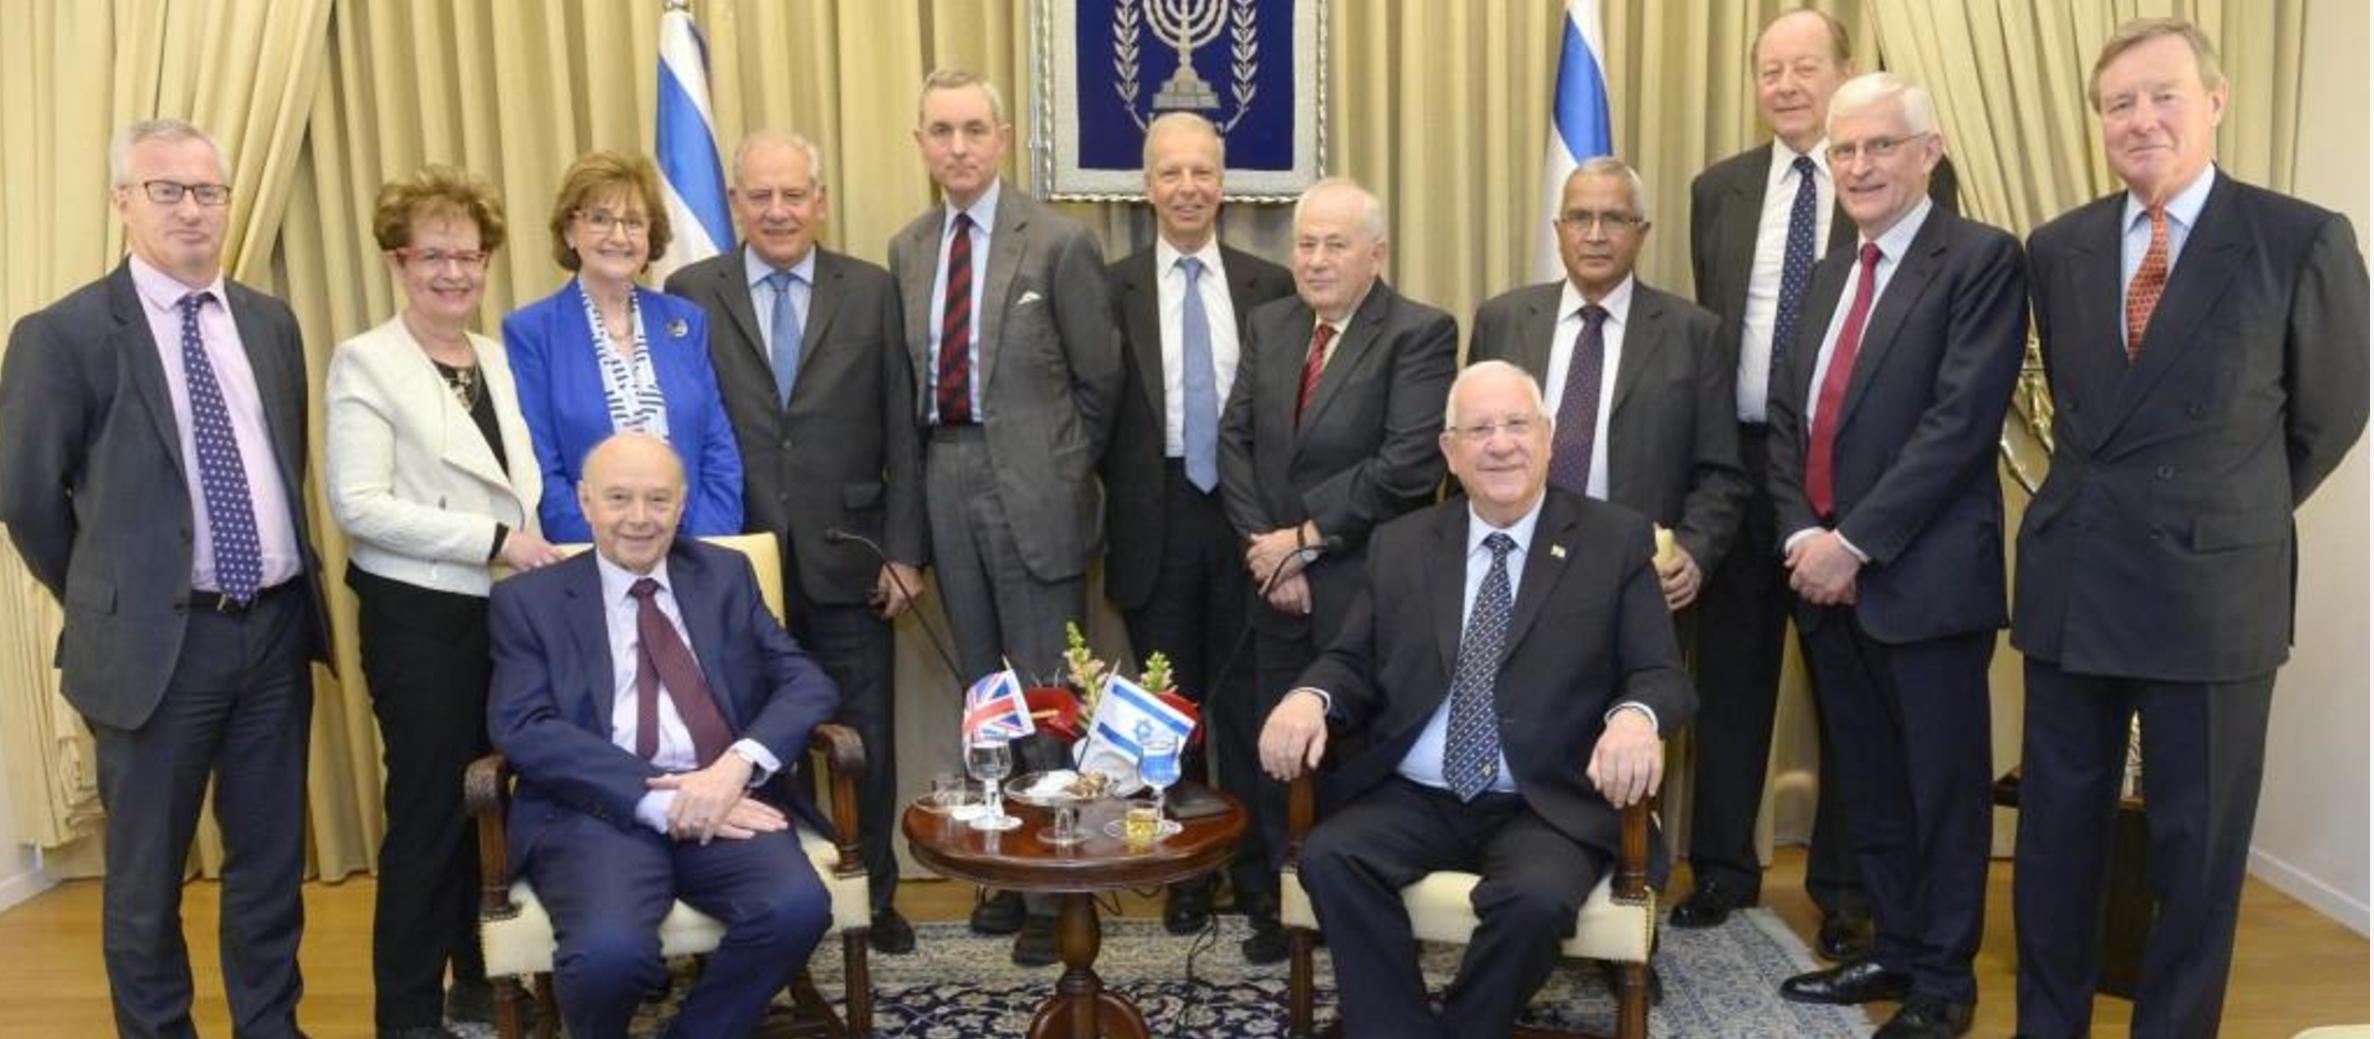 Cross-party peers hold talks with Israel’s President